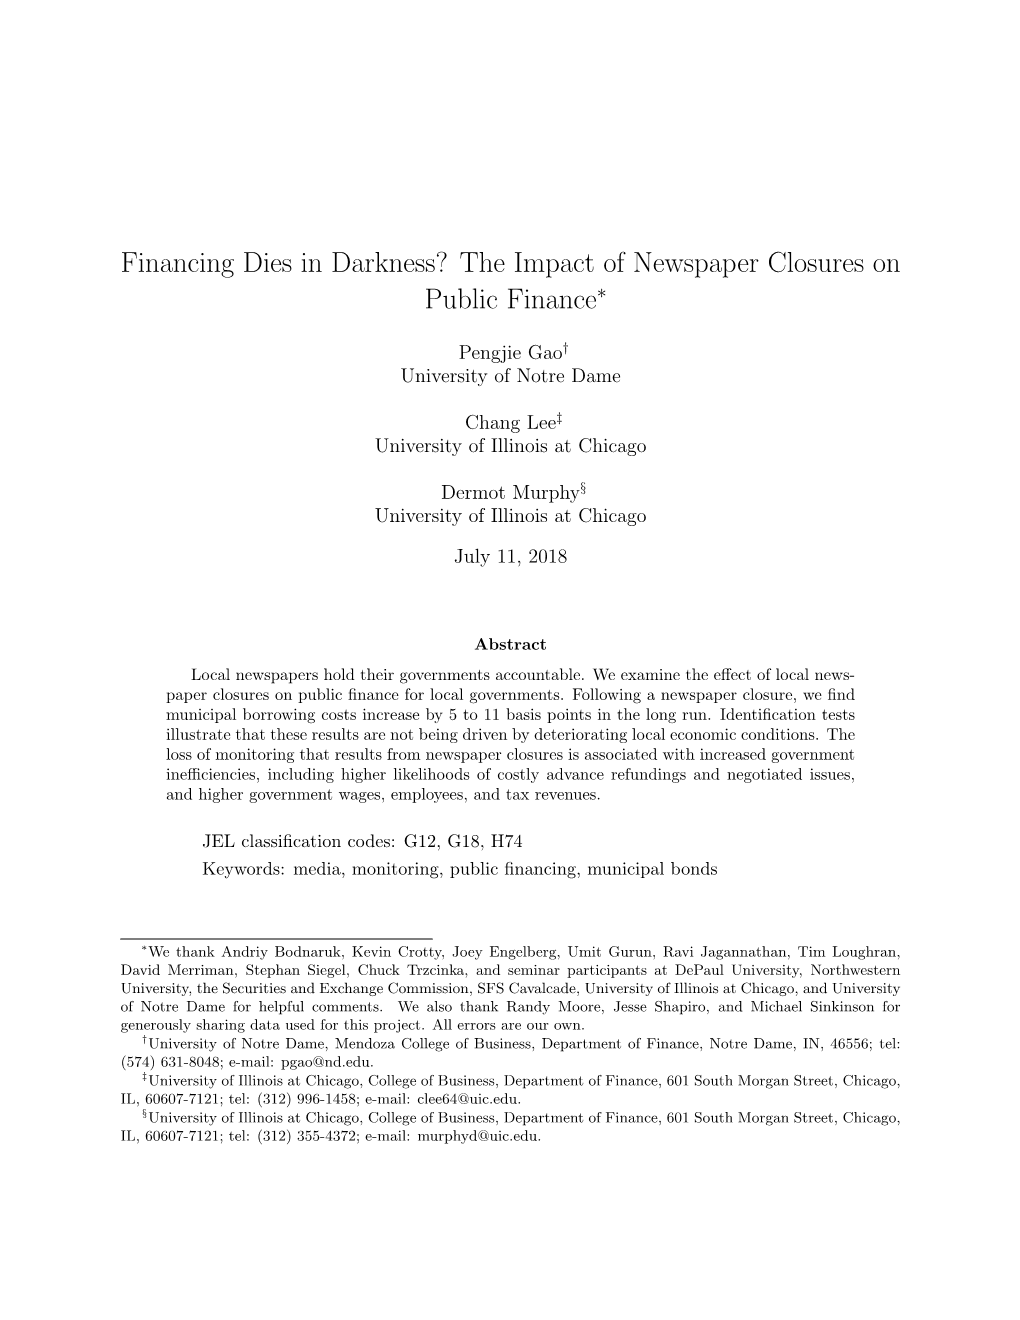 The Impact of Newspaper Closures on Public Finance∗